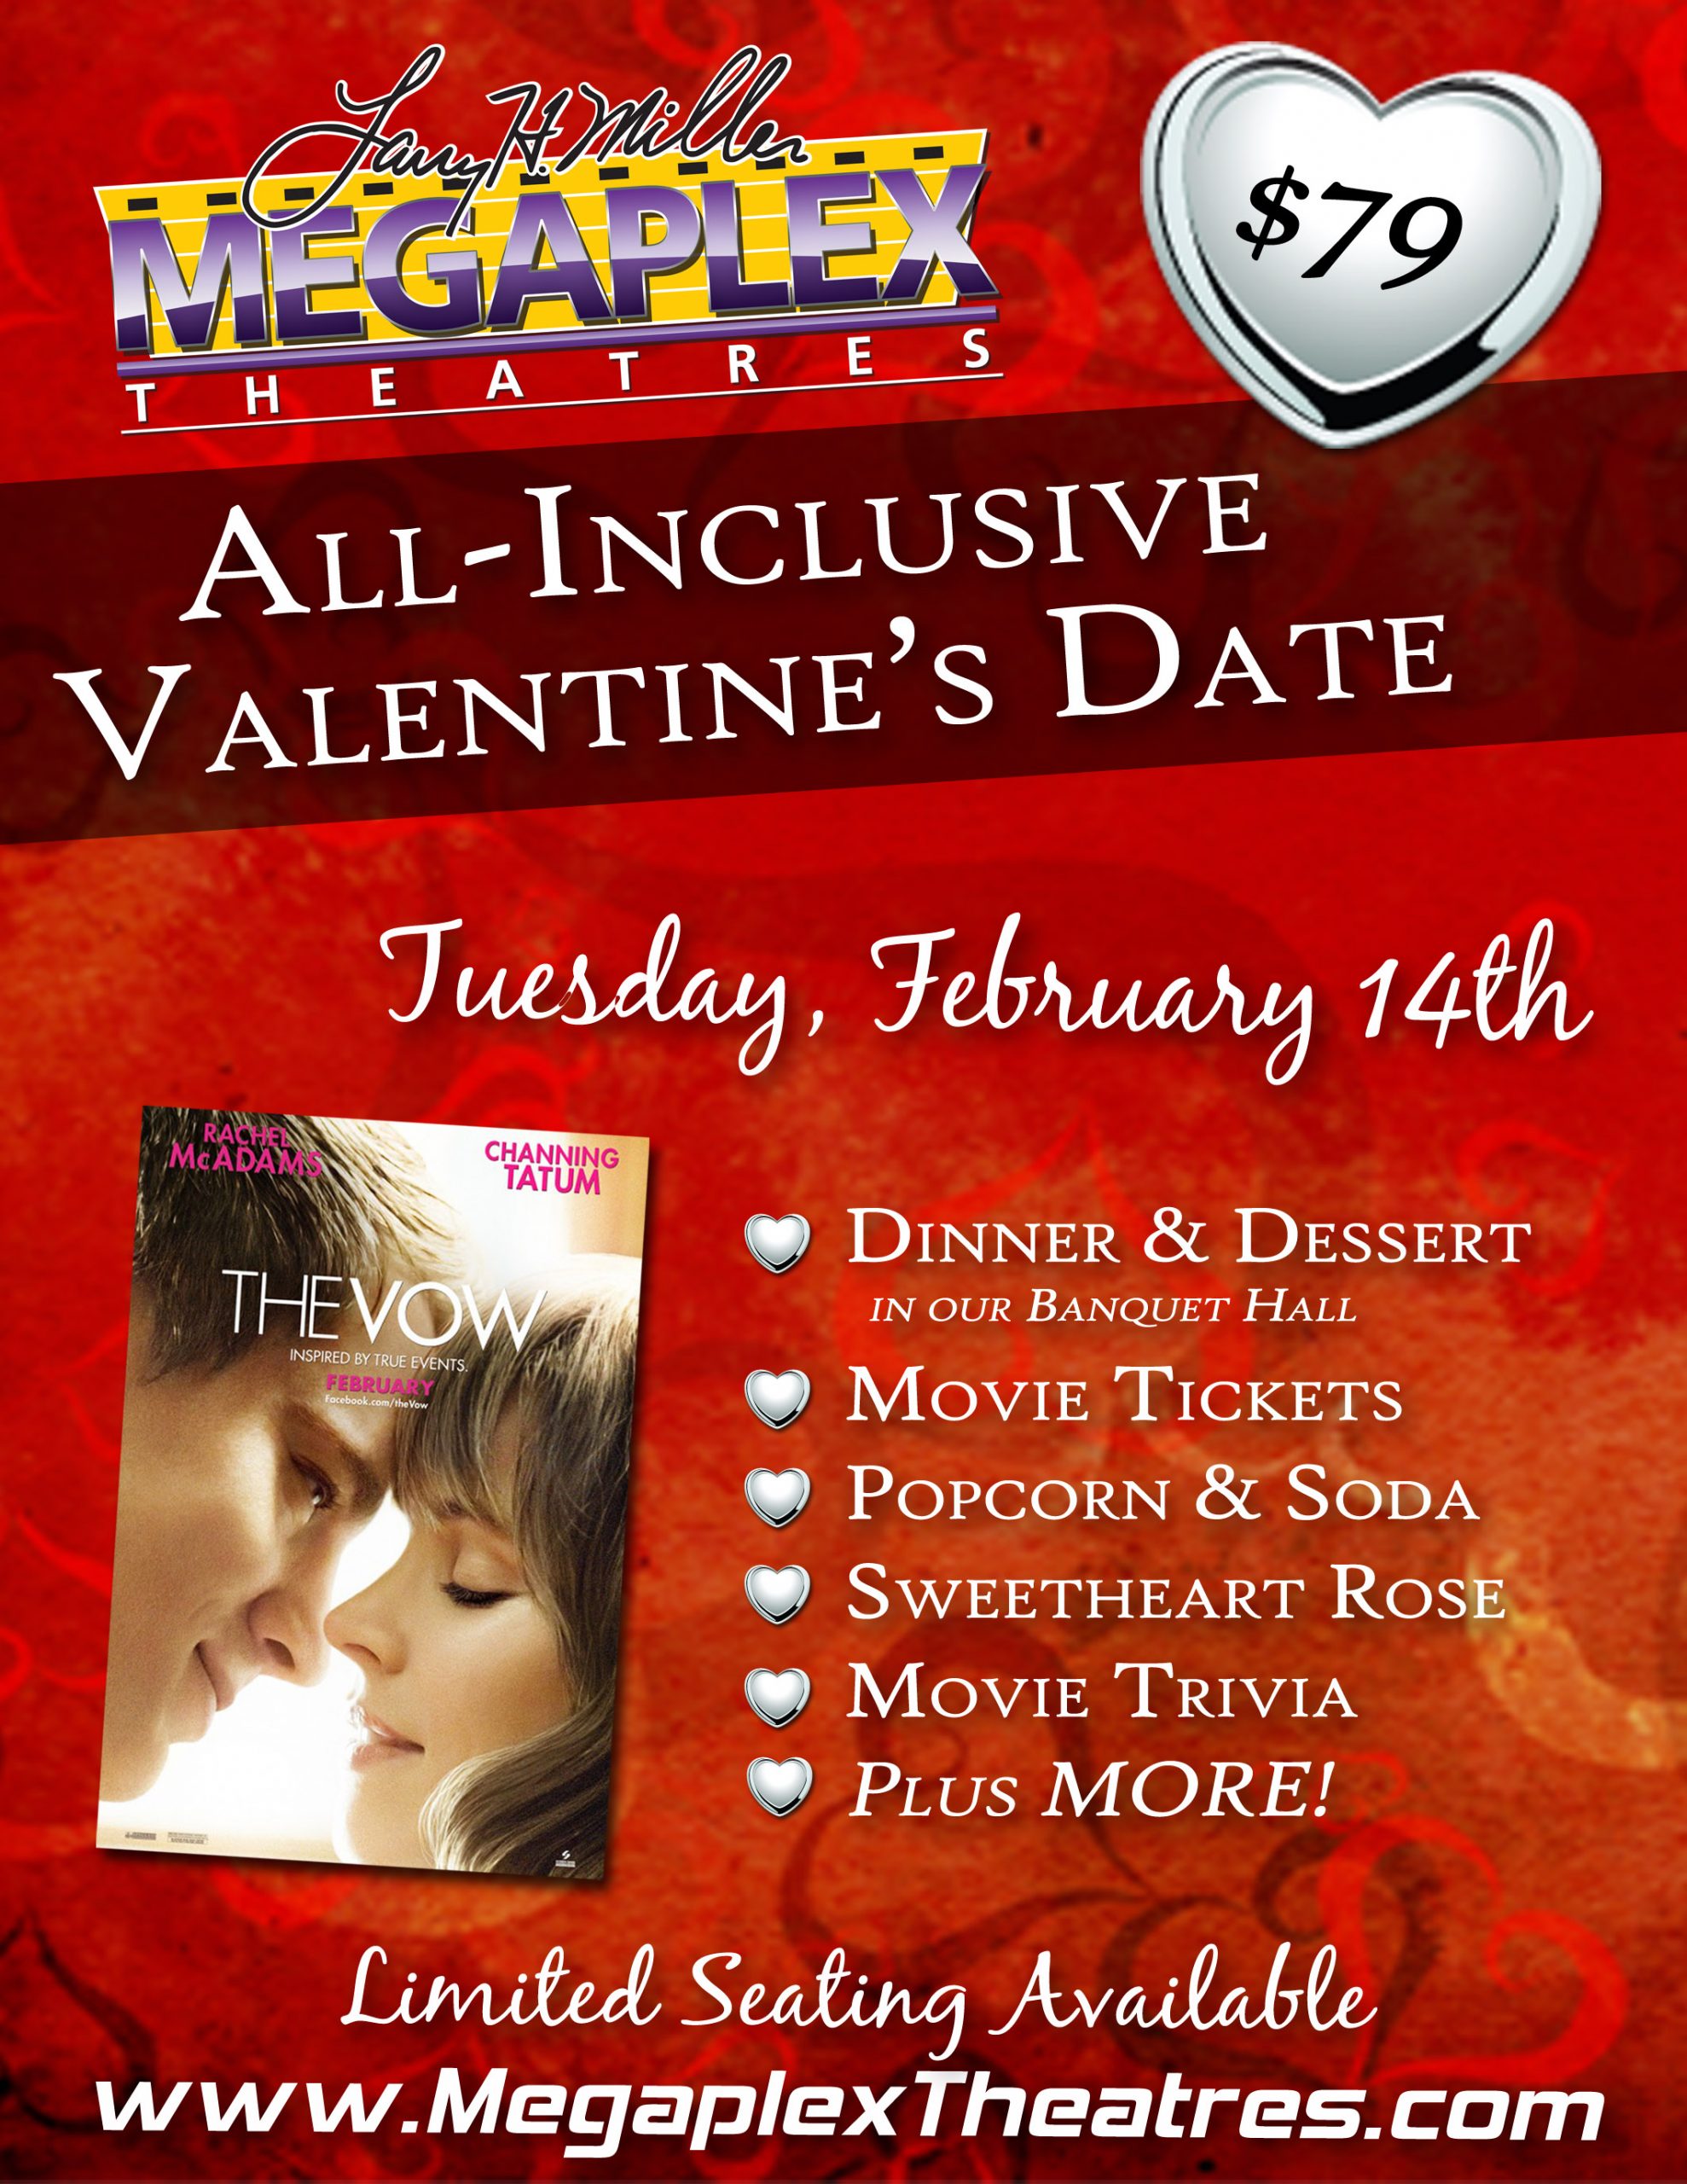 Utah Readers Only 79 for an AllInclusive Valentine's Dinner & Movie